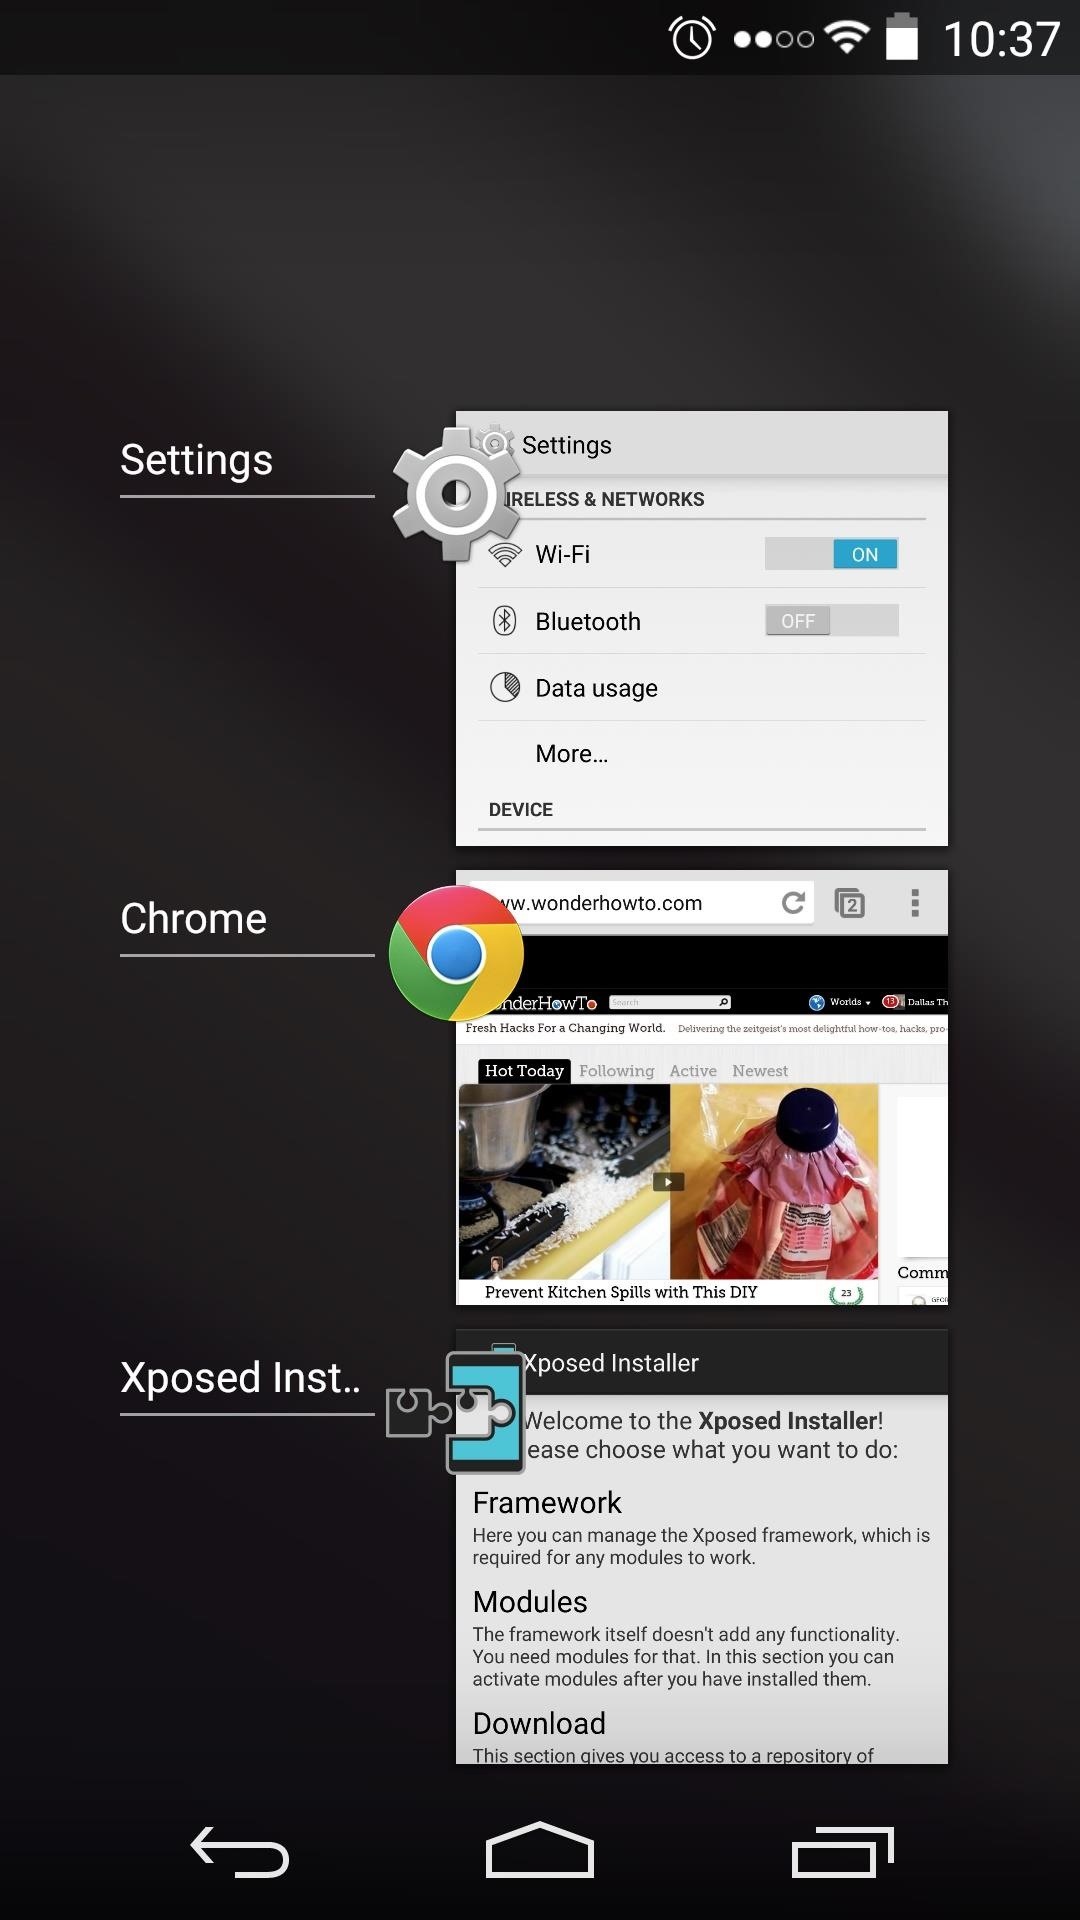 Theme Your Nexus 5 with Flat System Icons & Translucent Pull-Downs